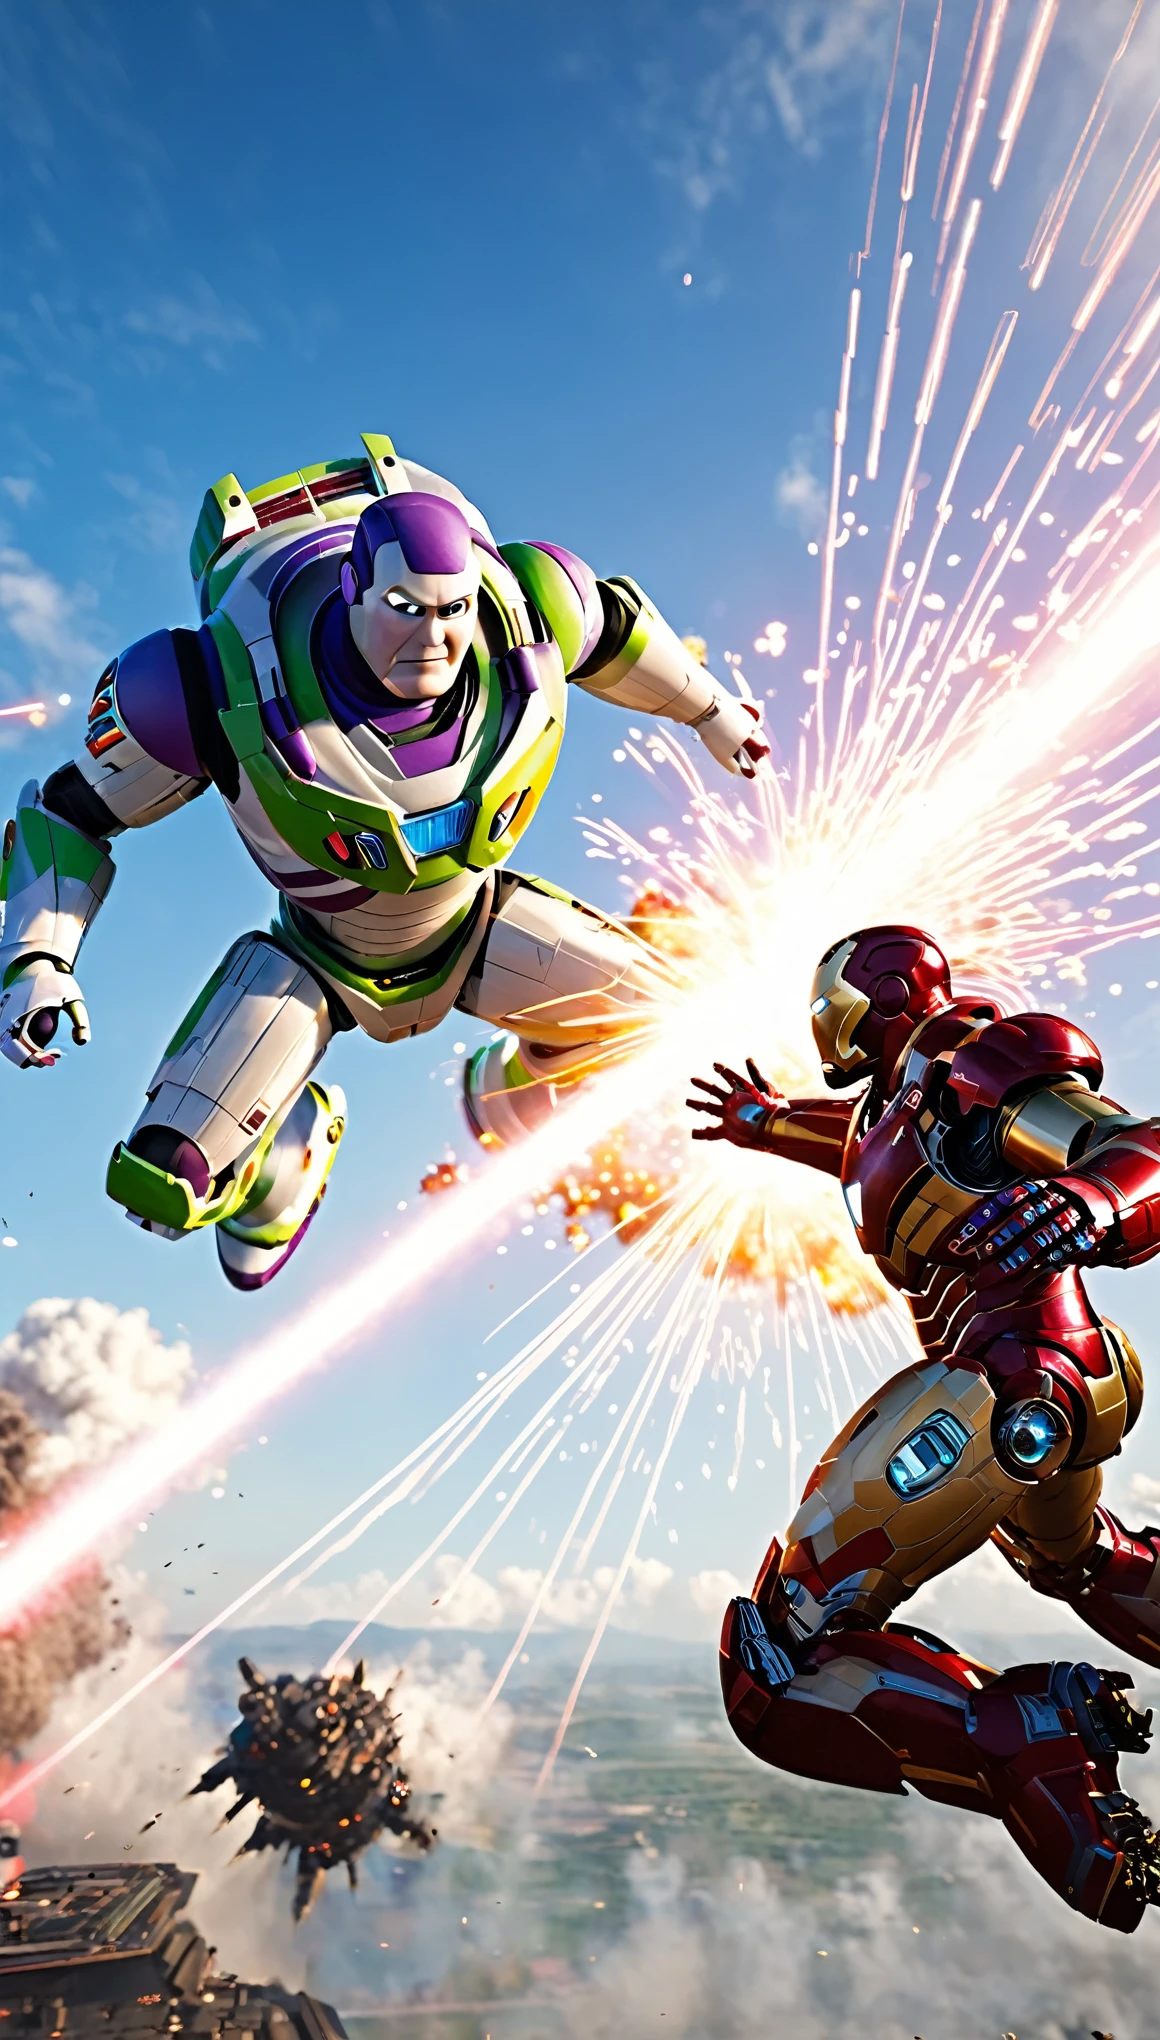 a dynamic battle scene featuring buzz lightyear and iron man, flying high in the sky with laser beams and explosions, highly detailed, cinematic composition, epic sci-fi action, dramatic lighting, vibrant colors, 8k, photorealistic, unreal engine, concept art style